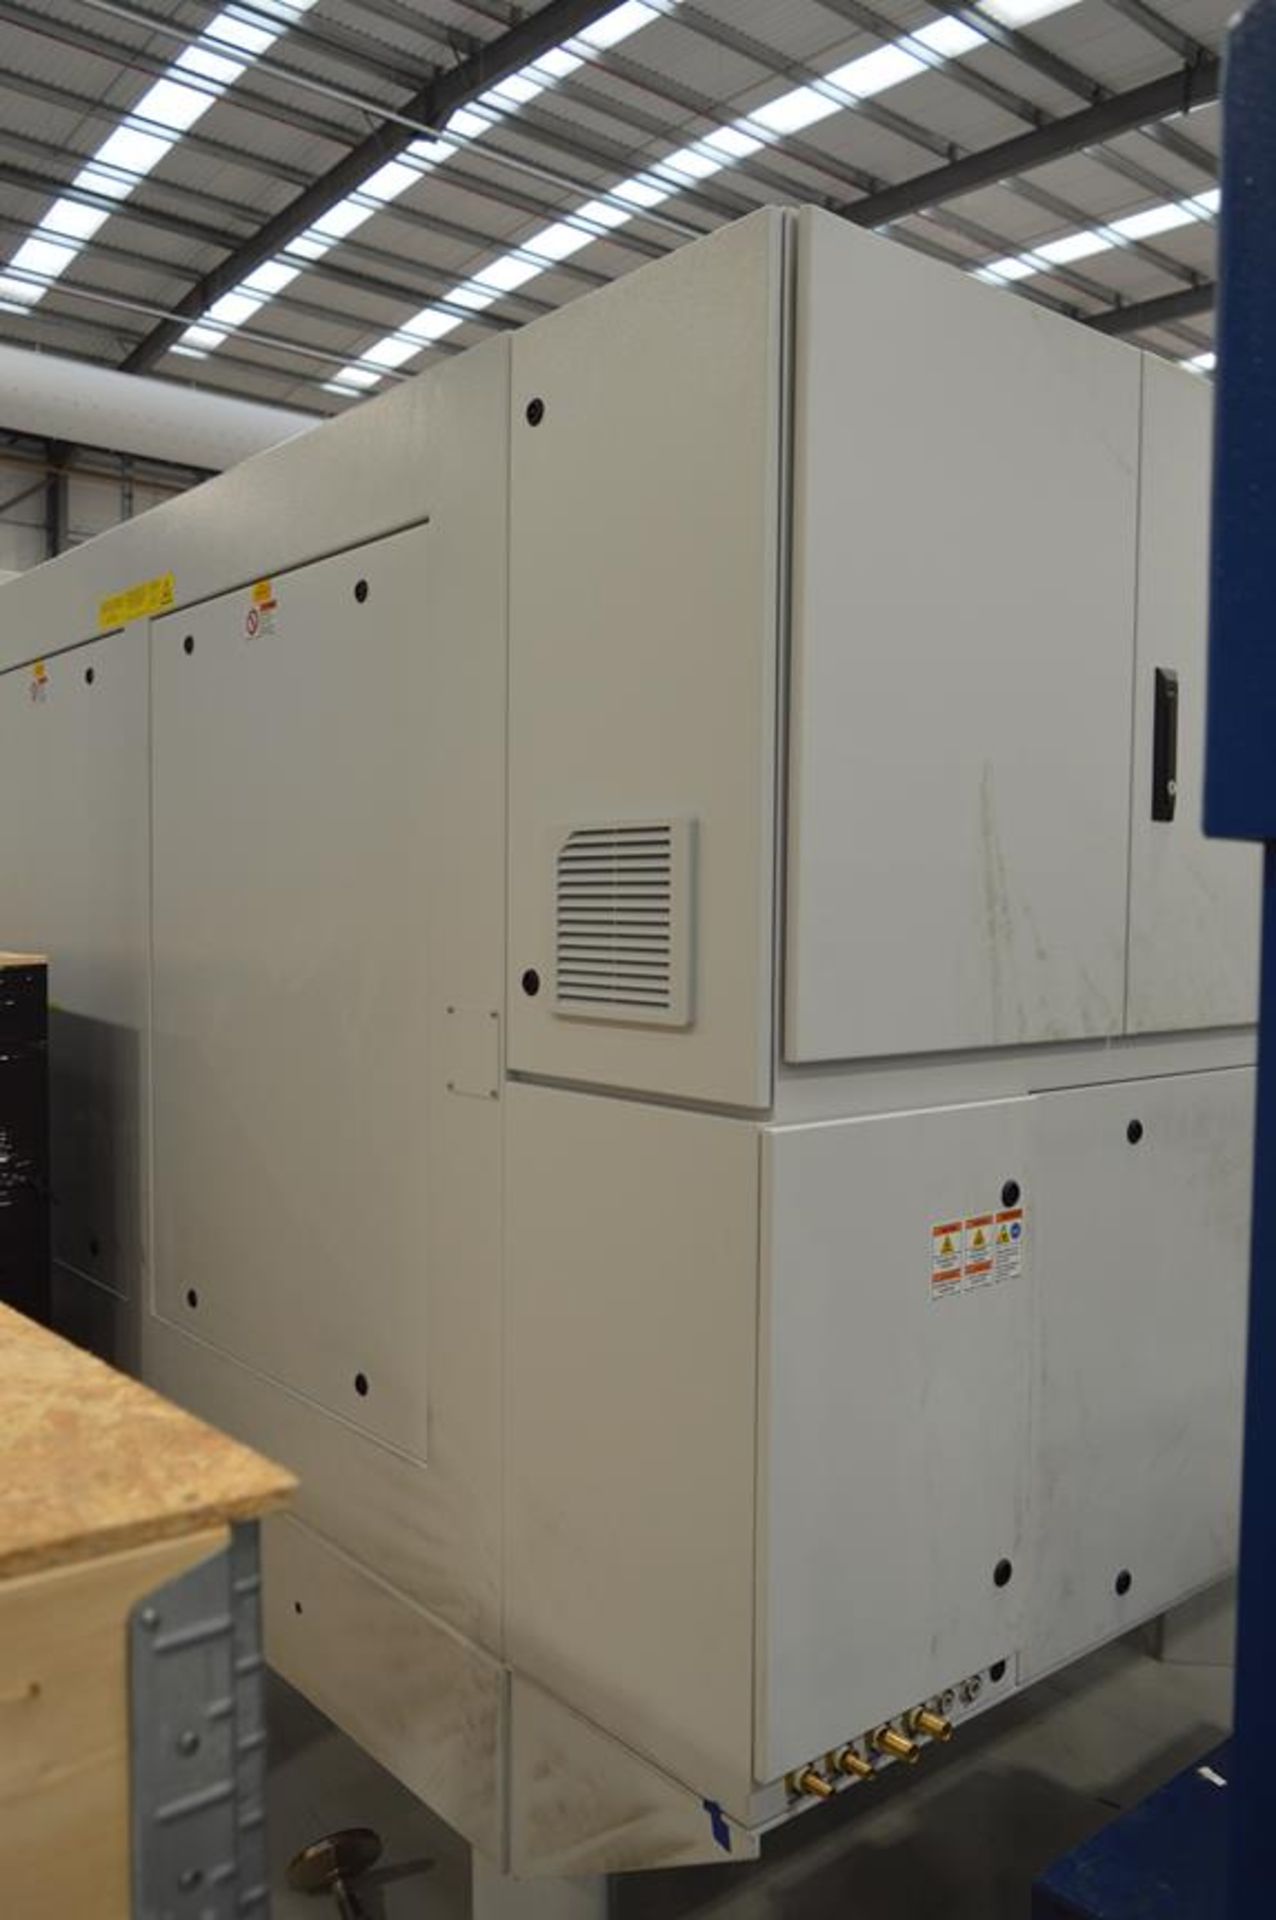 IPG Photonics, 1.5kw laser welding system with IPG YLR-1500-WC fibre laser source, No. PLMP32200563 - Image 5 of 10